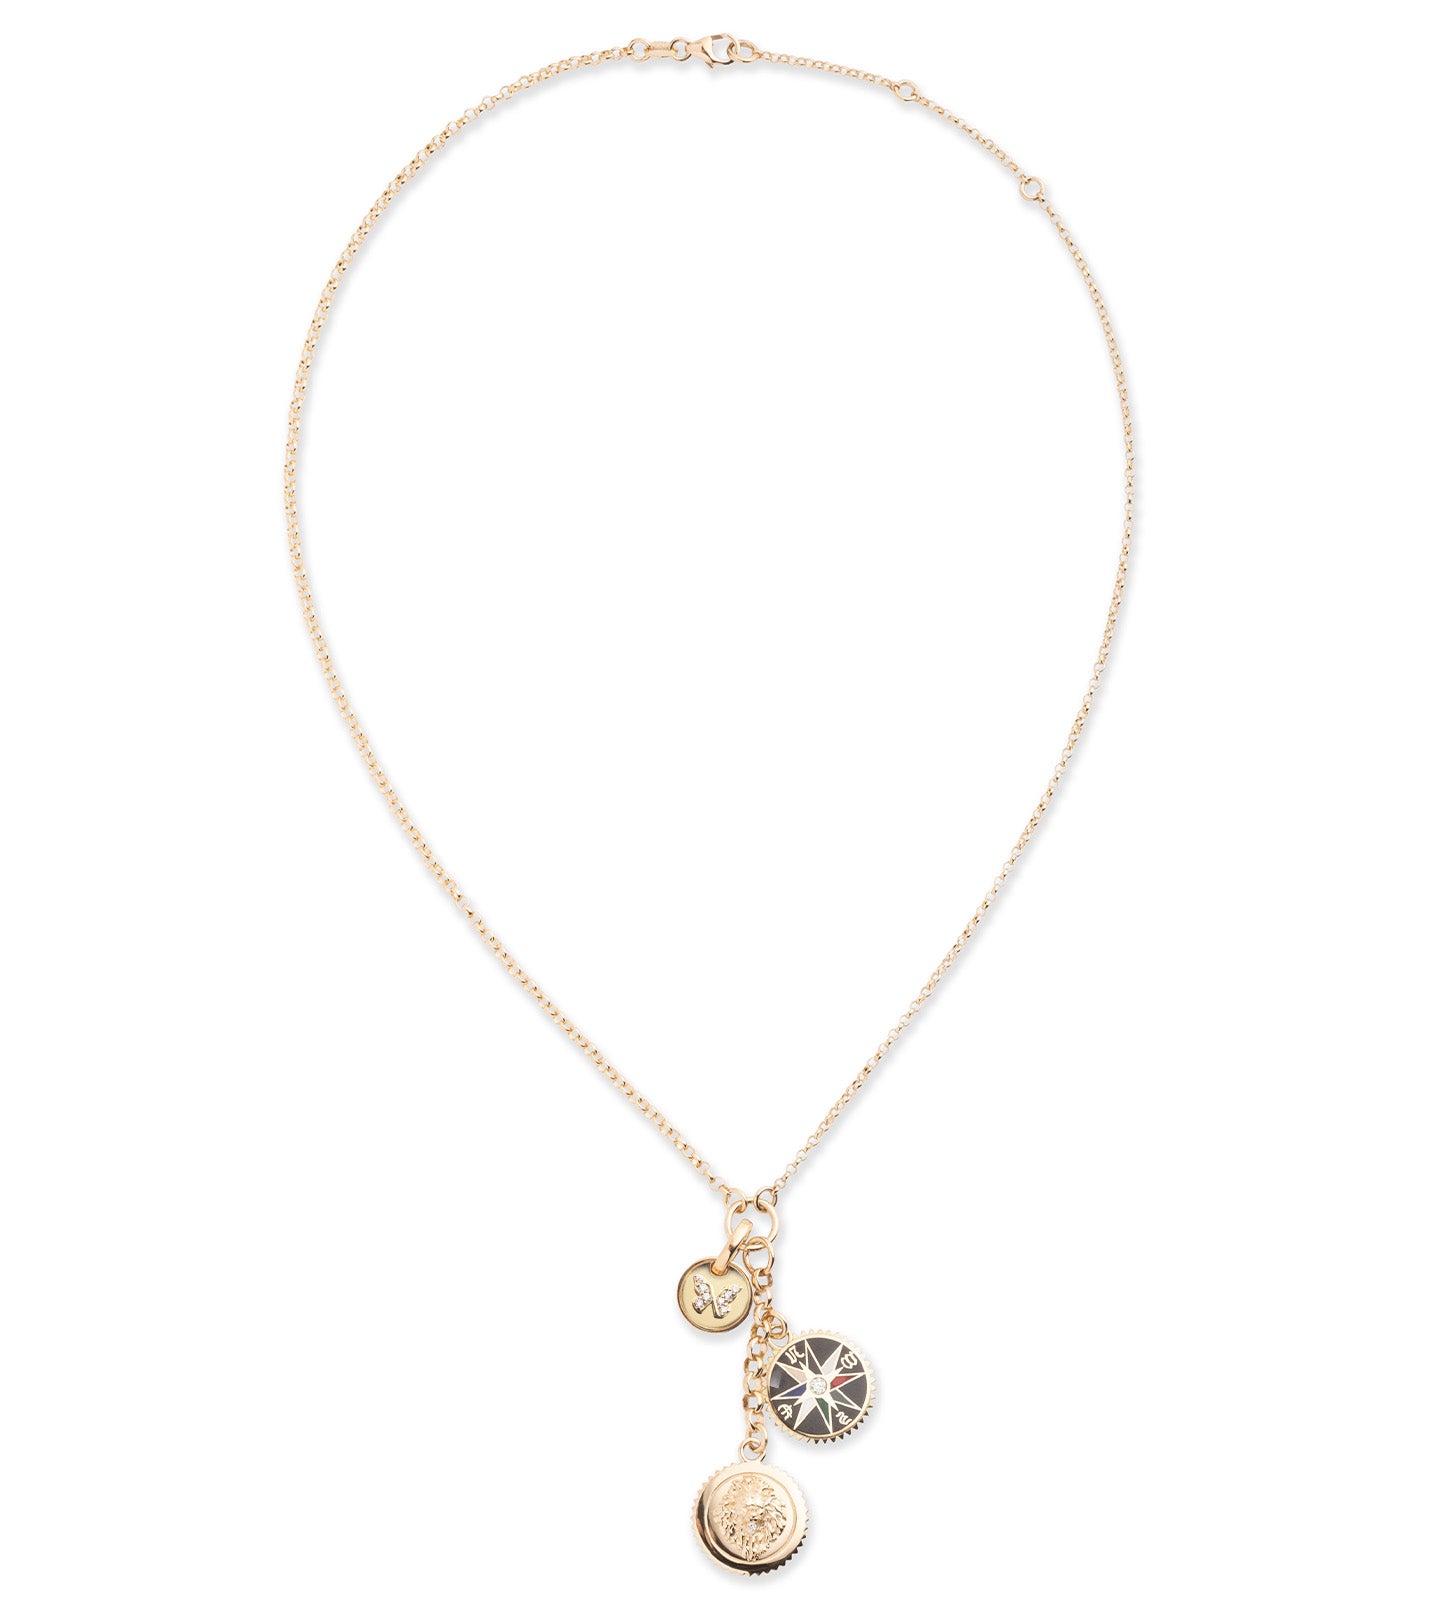 Strength, Internal Compass & Reverie Story : Small Mixed Belcher Extension Chain Necklace